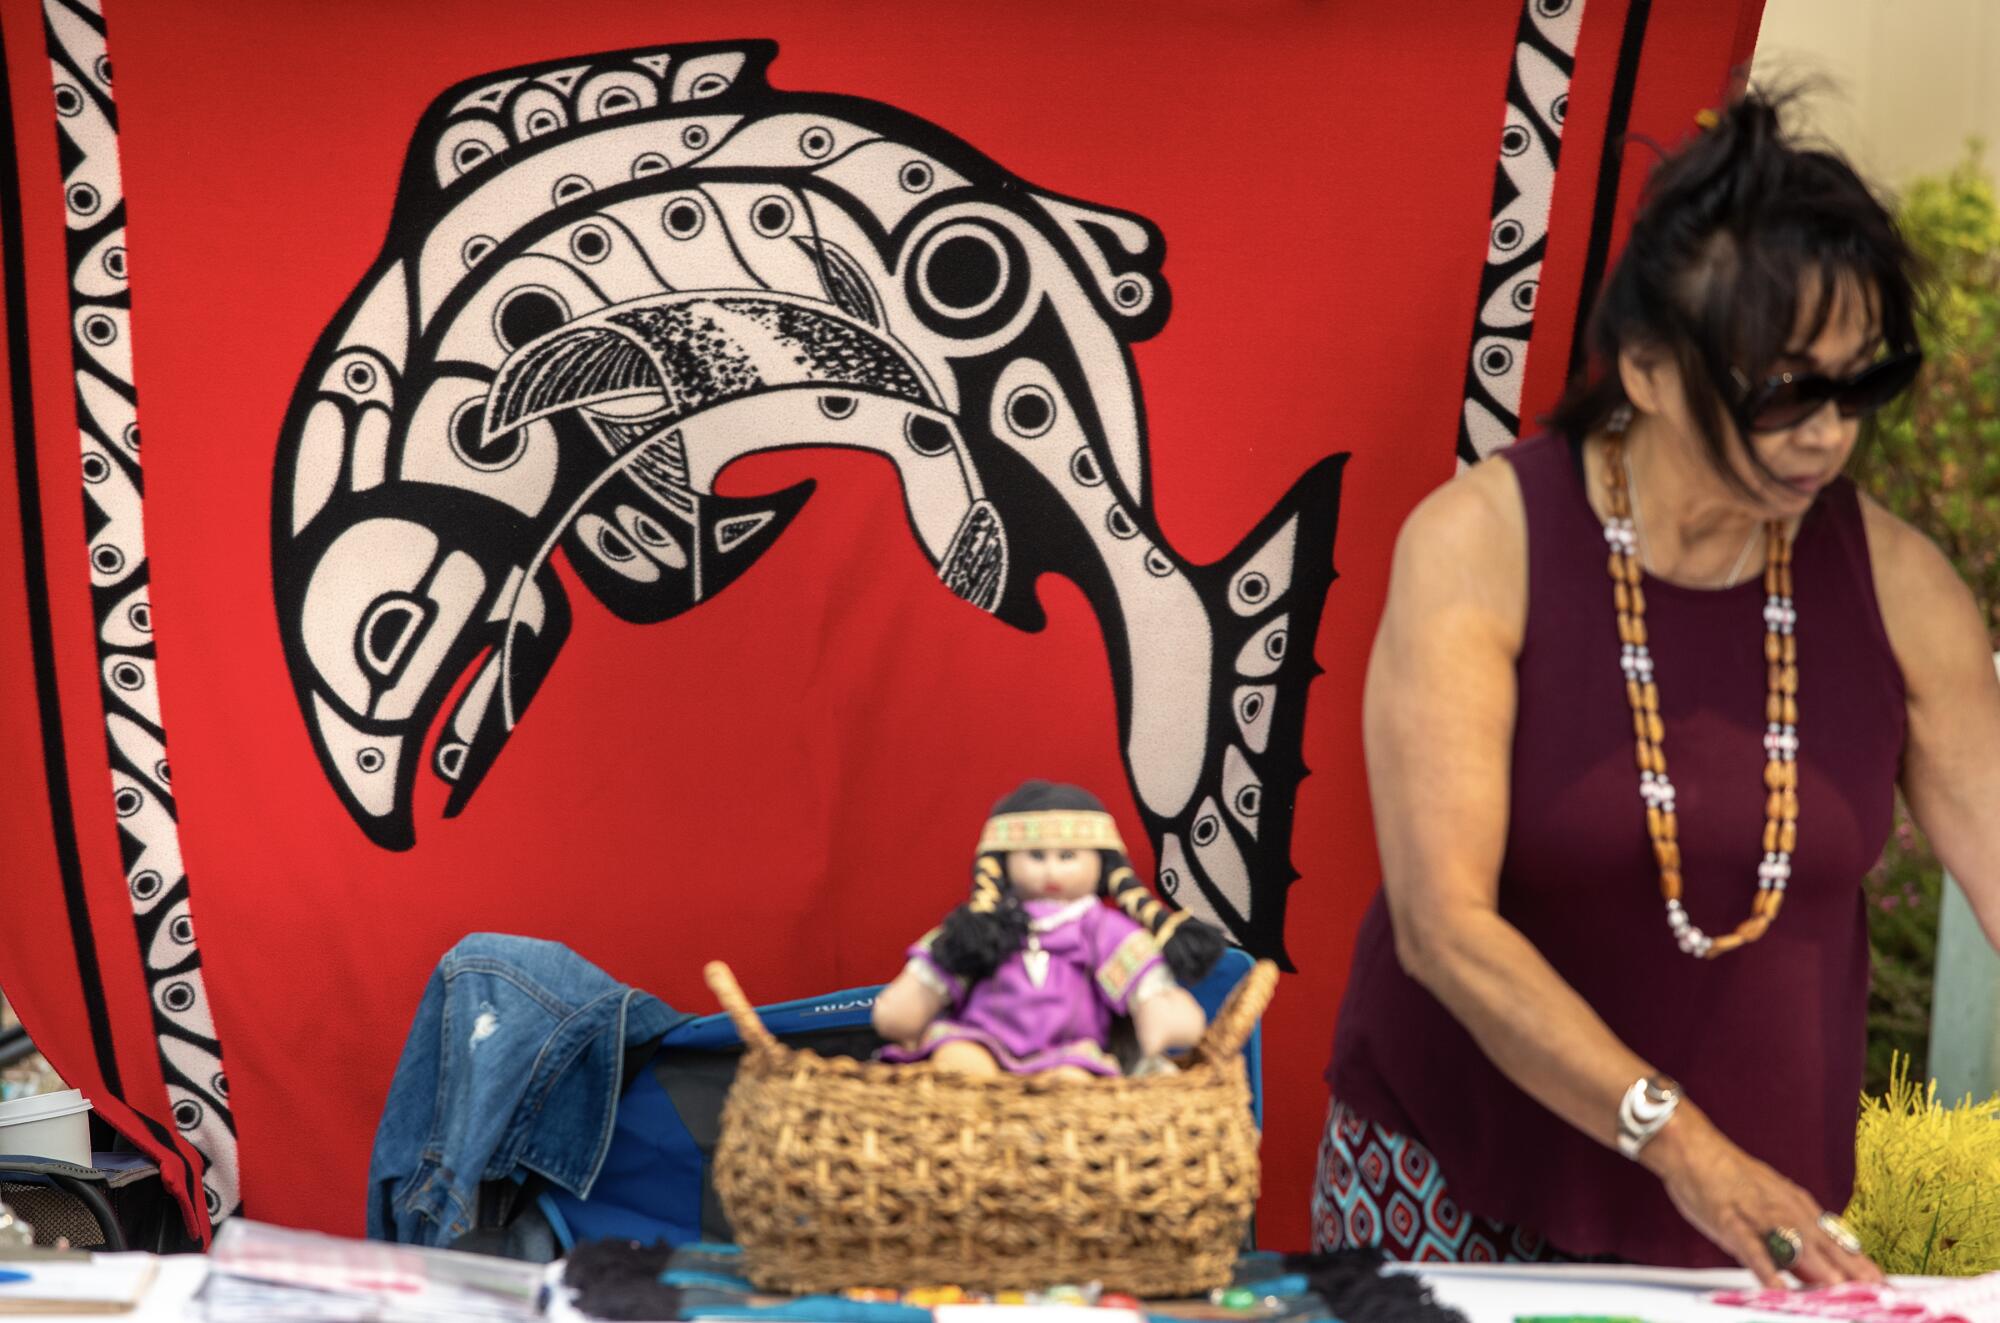 A woman stands at a festival booth beside an illustration of a salmon.